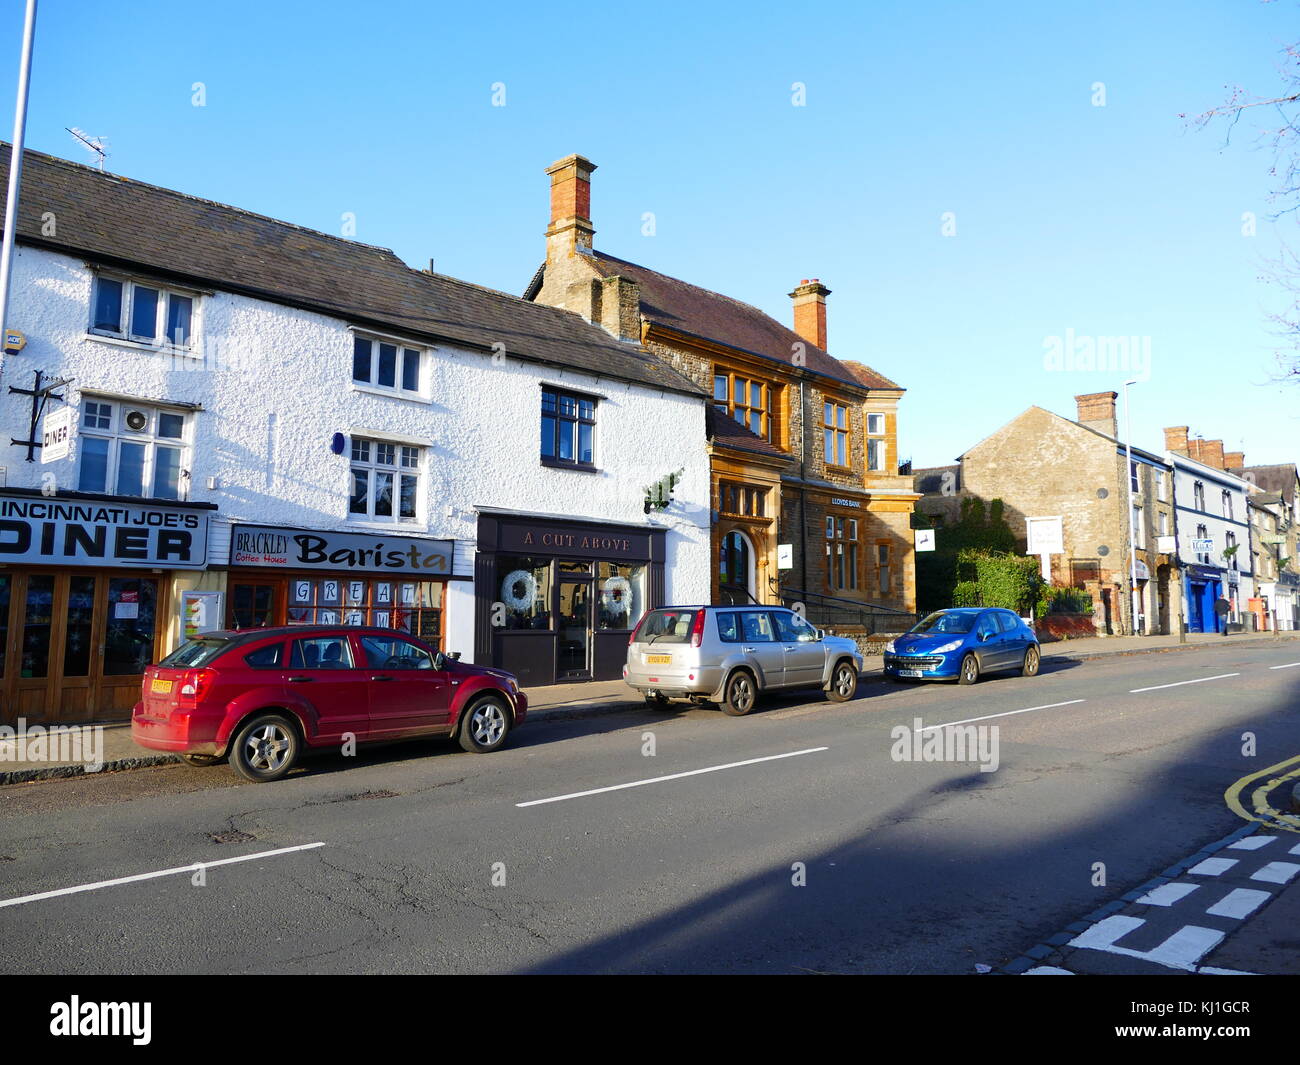 Georgian and Victorian styles of architecture in Brackley a village in Northamptonshire, England. Stock Photo